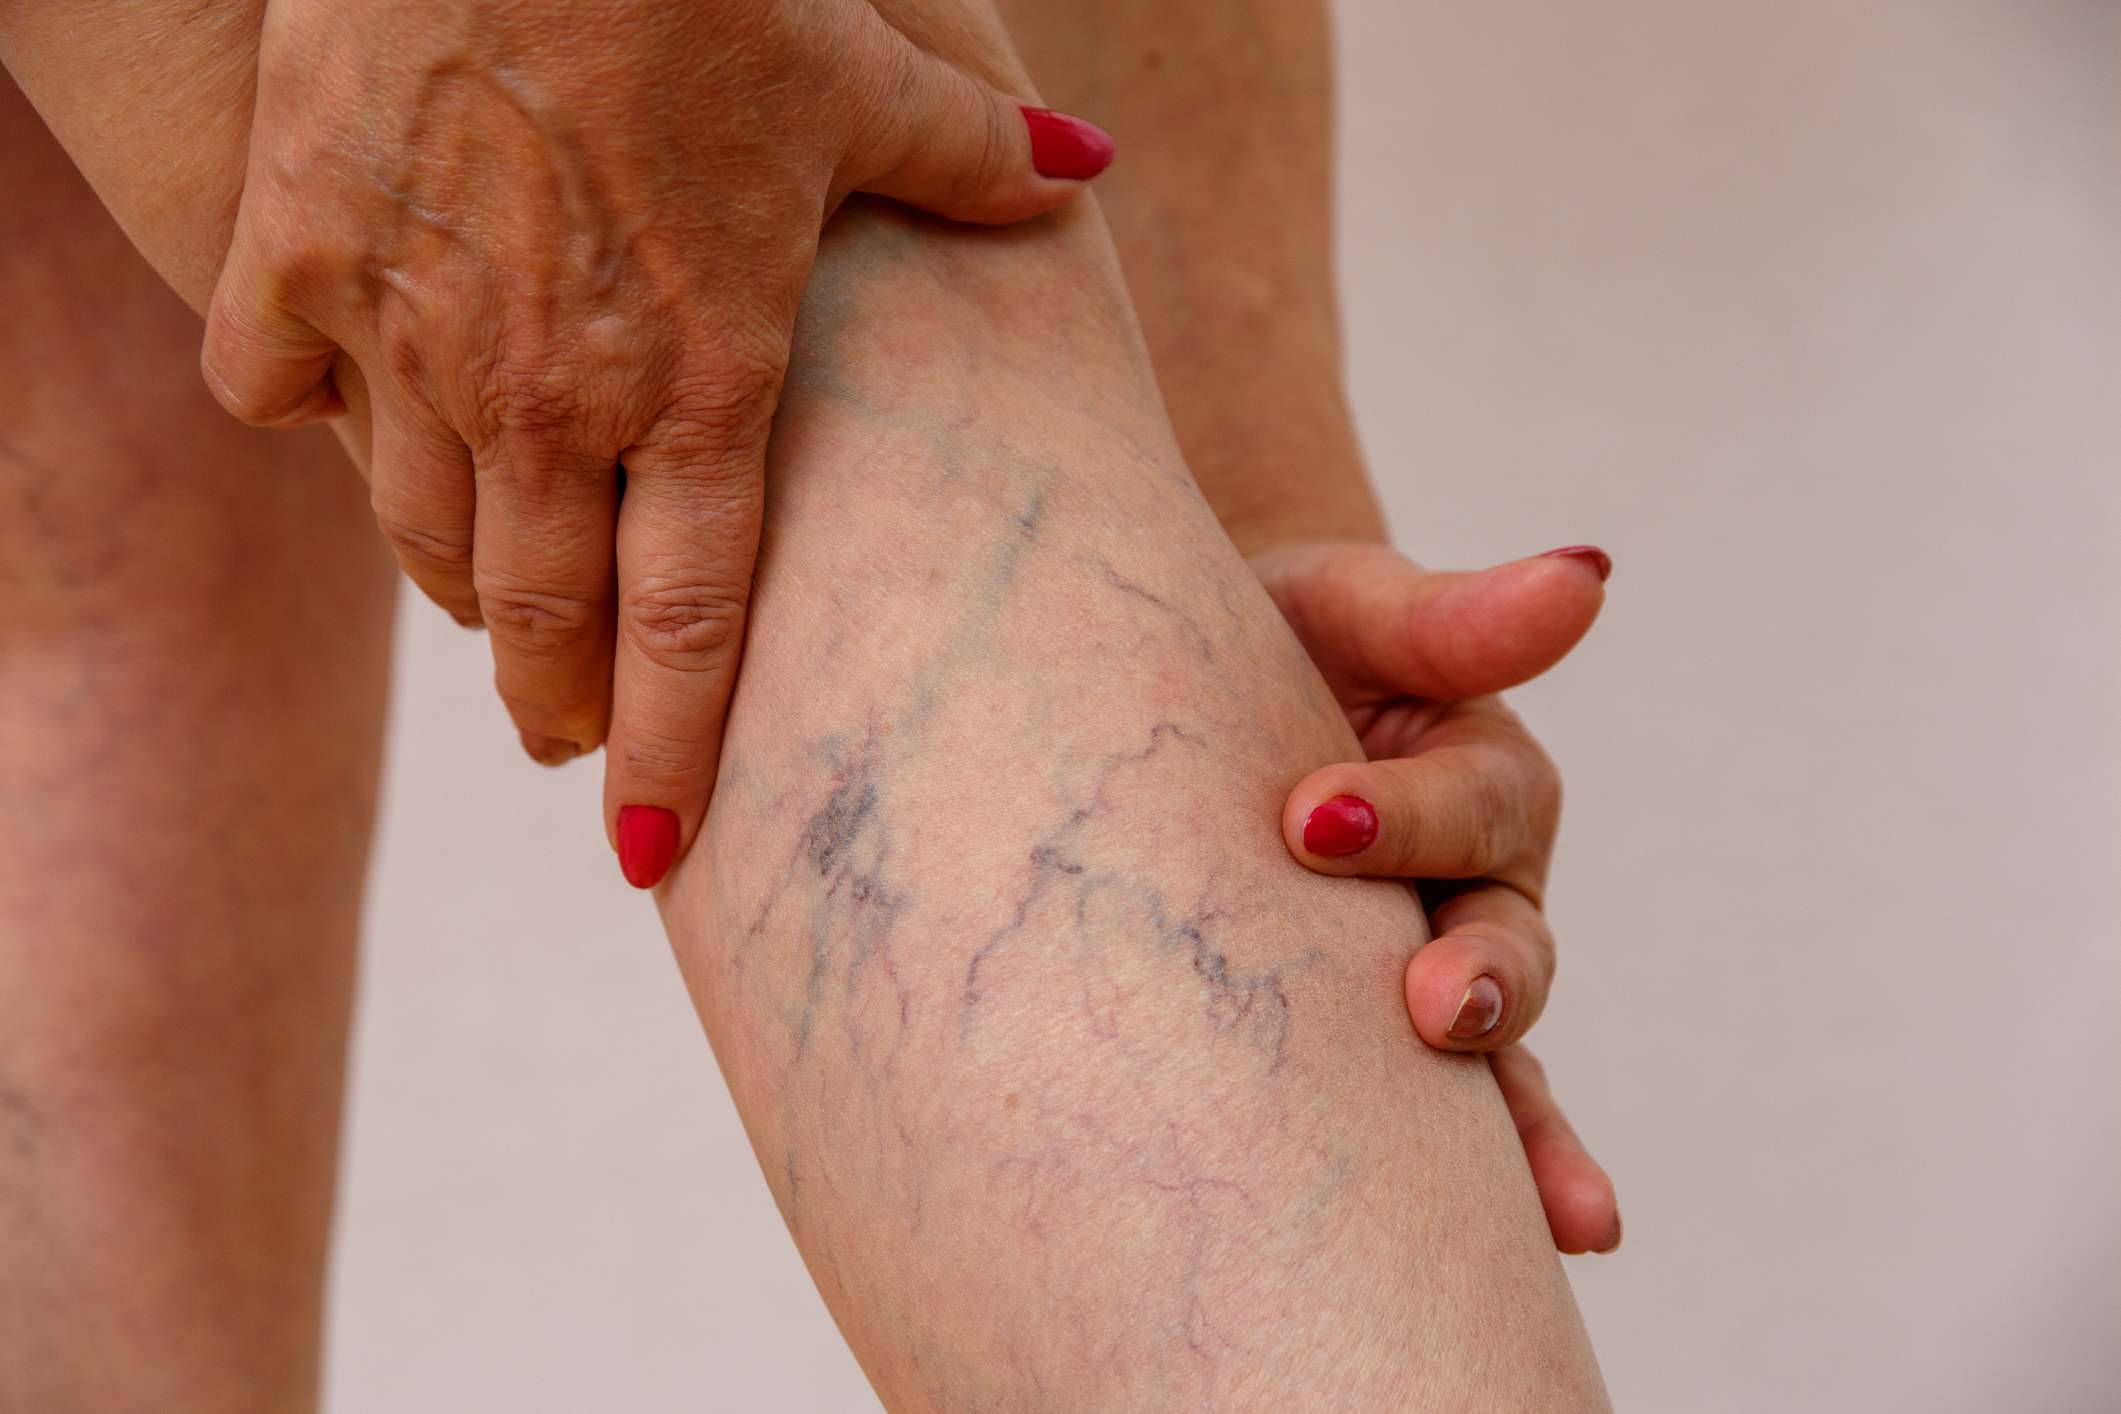 Varicose veins are described as swollen and twisted veins sometimes surrounded by patches of flooded capillaries known as spider veins. They mostly appear on legs and feet. Although they can be mildly painful and disfiguring, they are usually considered harmless. When exacerbated, they become can hinder circulation to the point of causing swollen ankles, itchy skin, and aching in the affected limb.